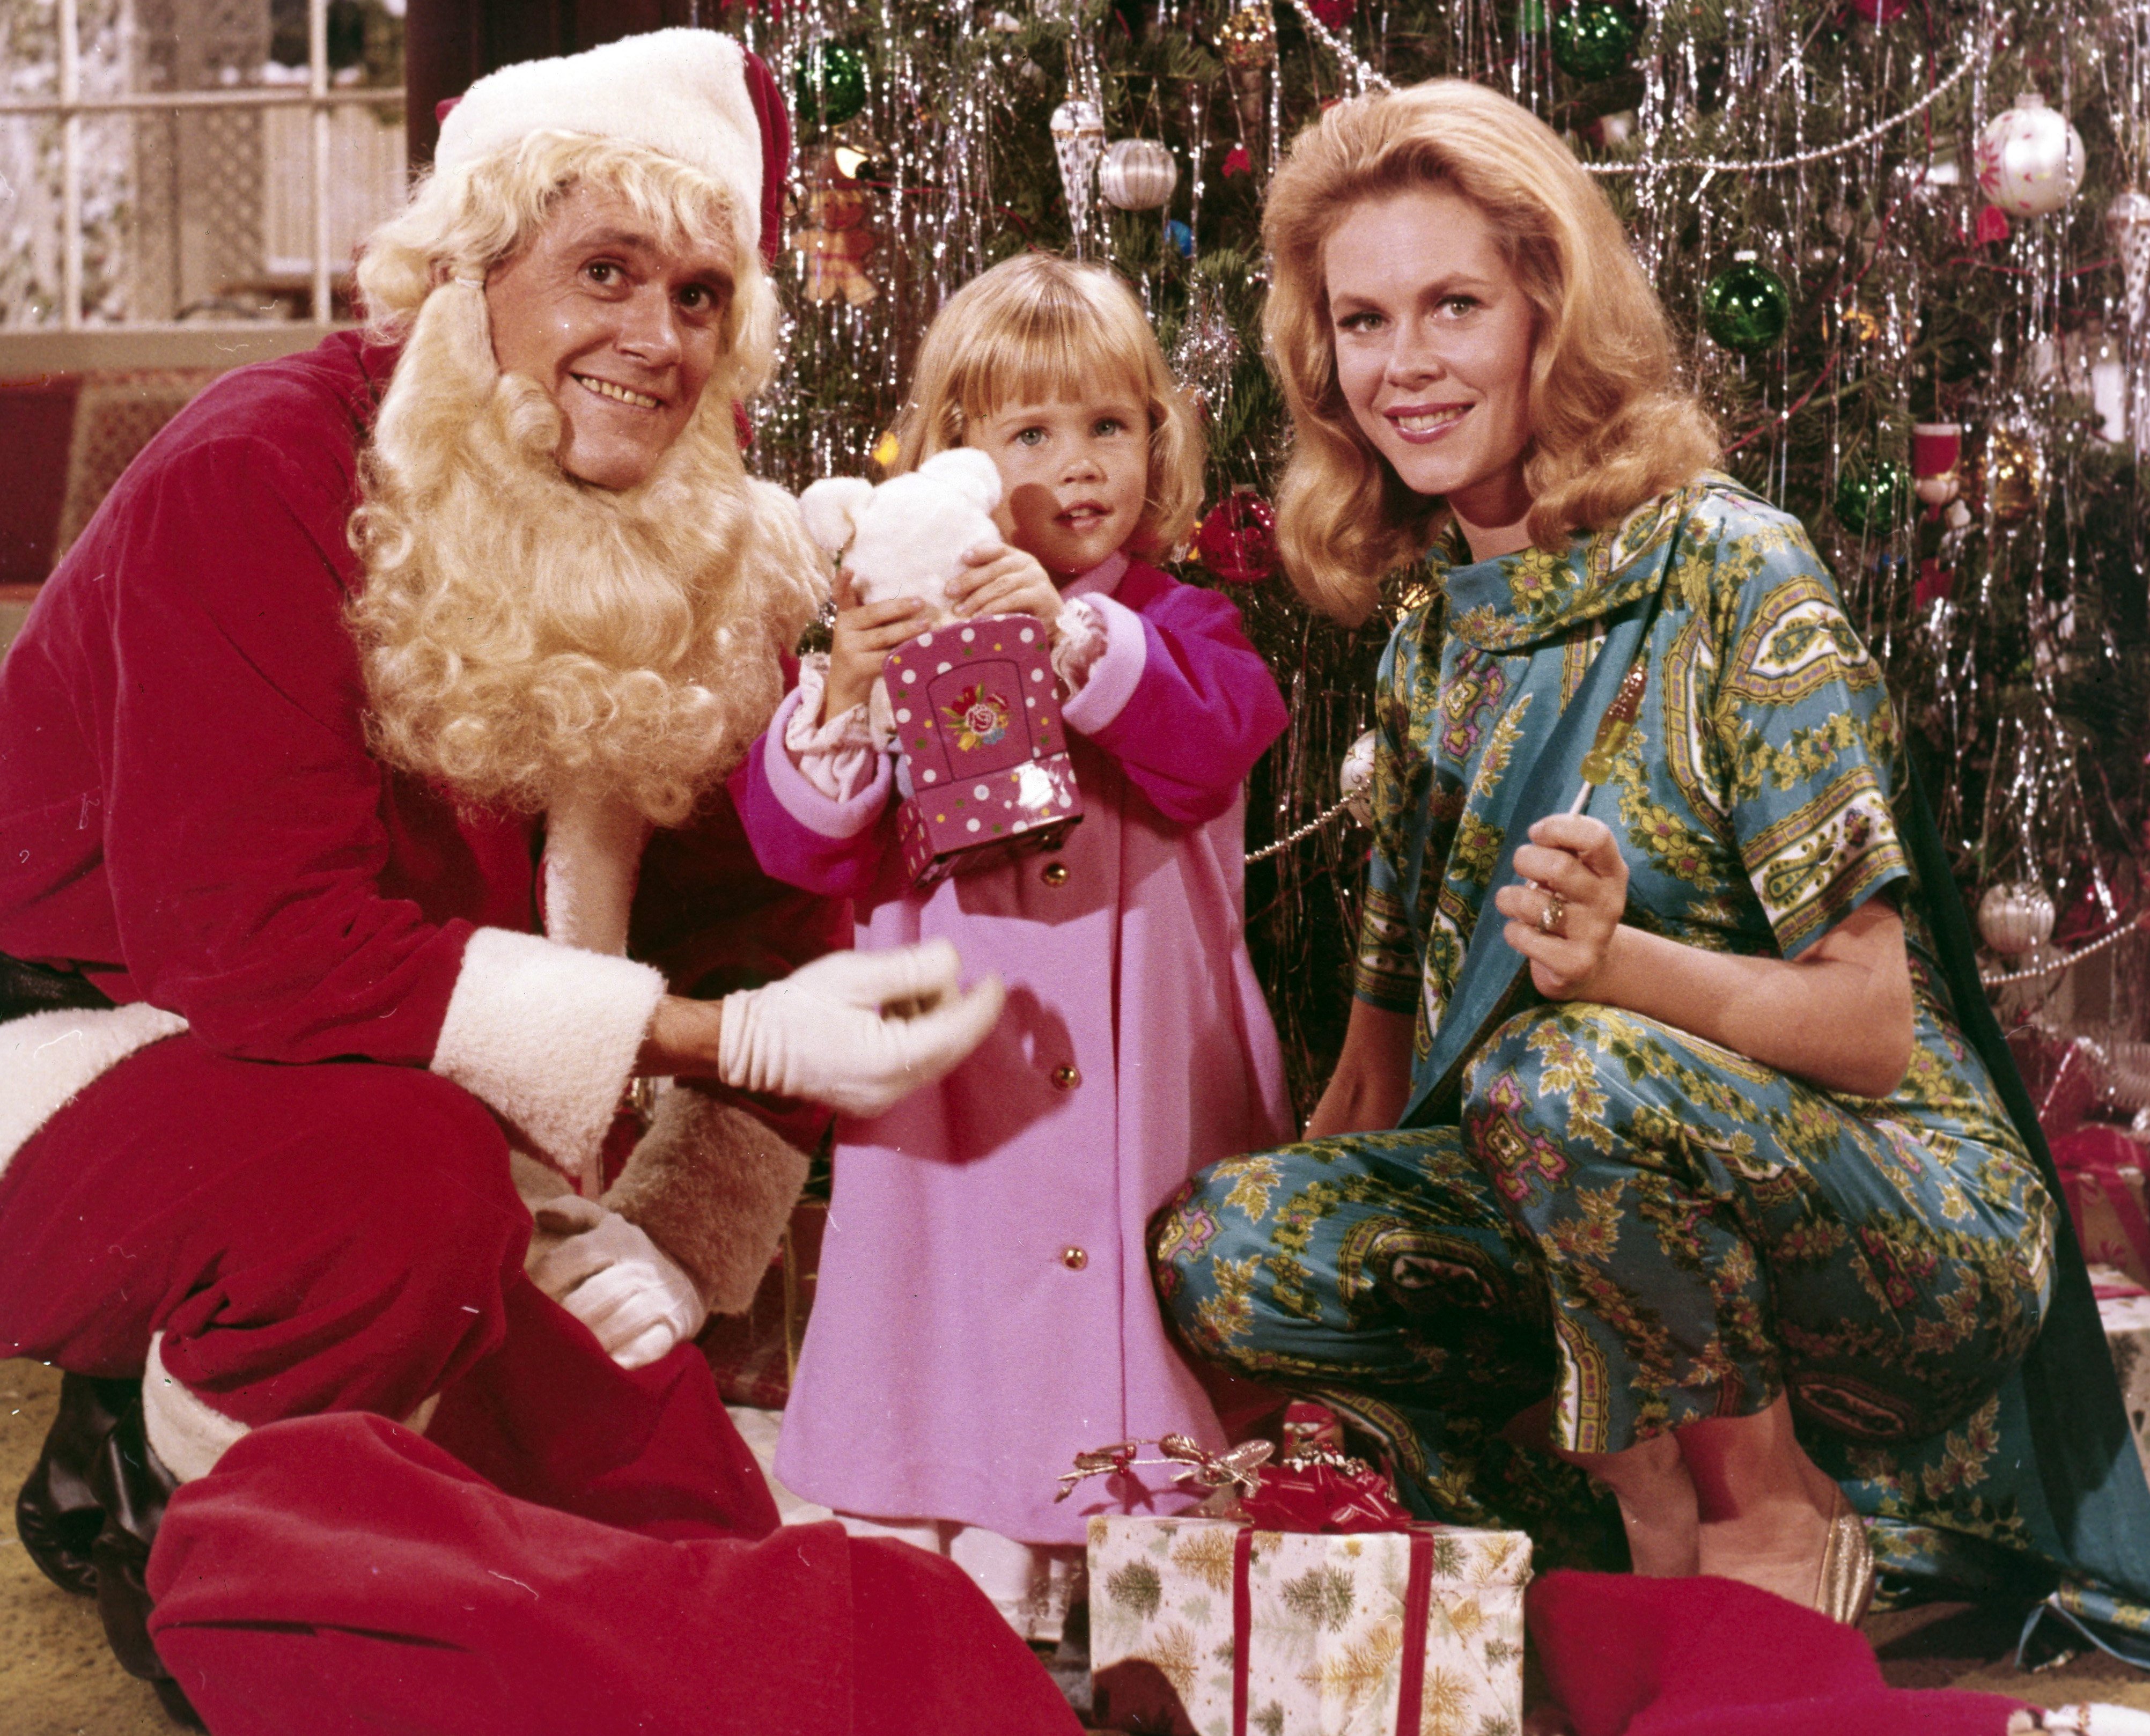 Darrin dressed as Santa with Tabitha and Samantha in 'Bewitched'